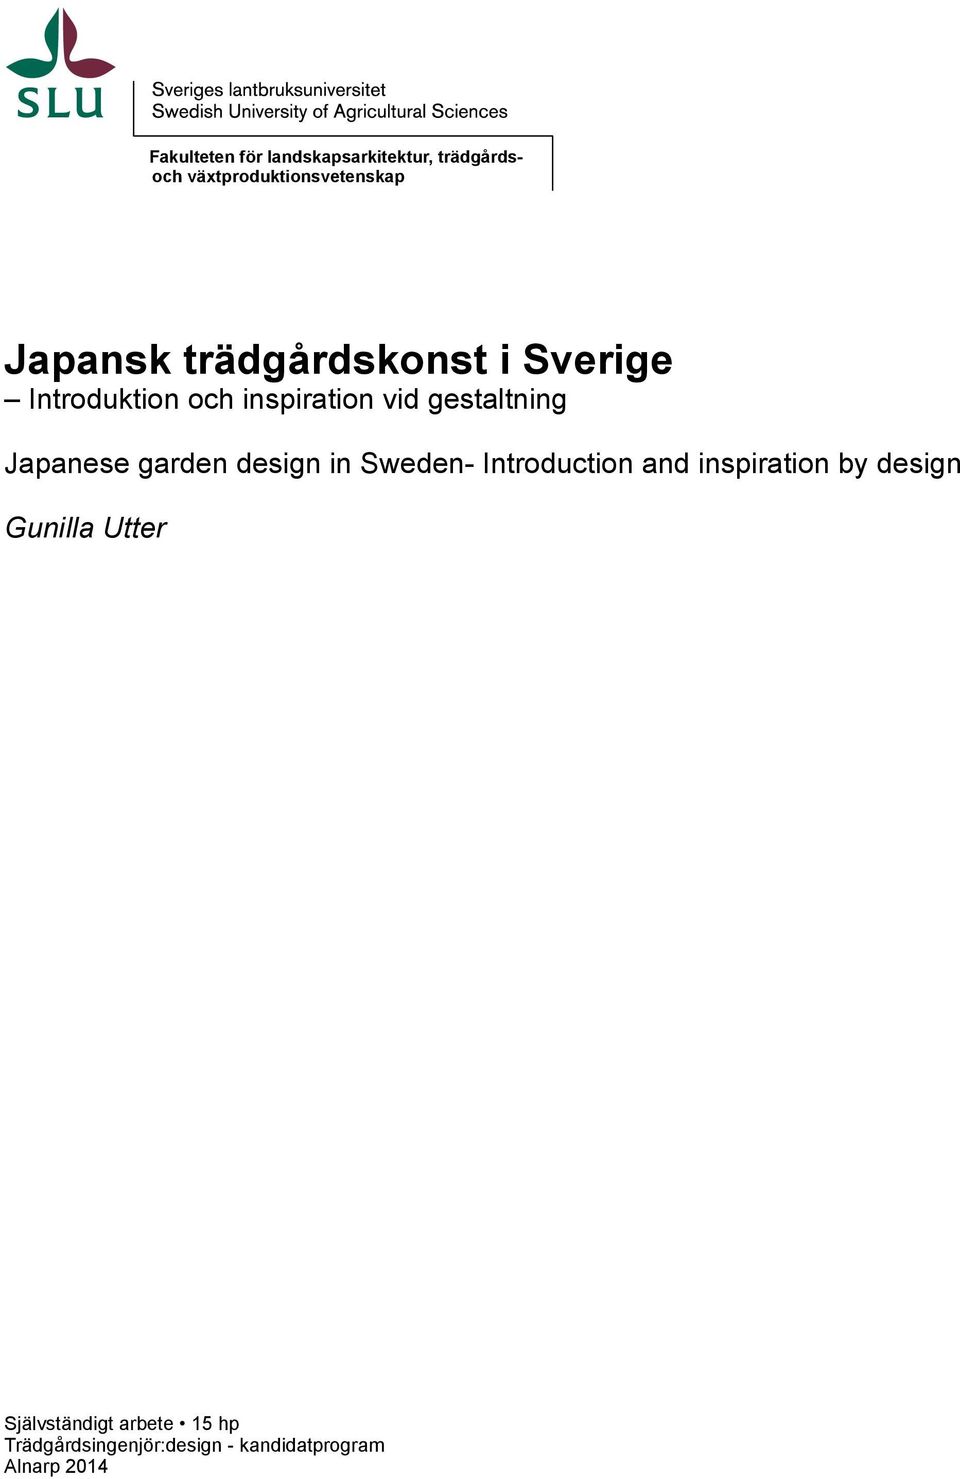 Japanese garden design in Sweden- Introduction and inspiration by design!